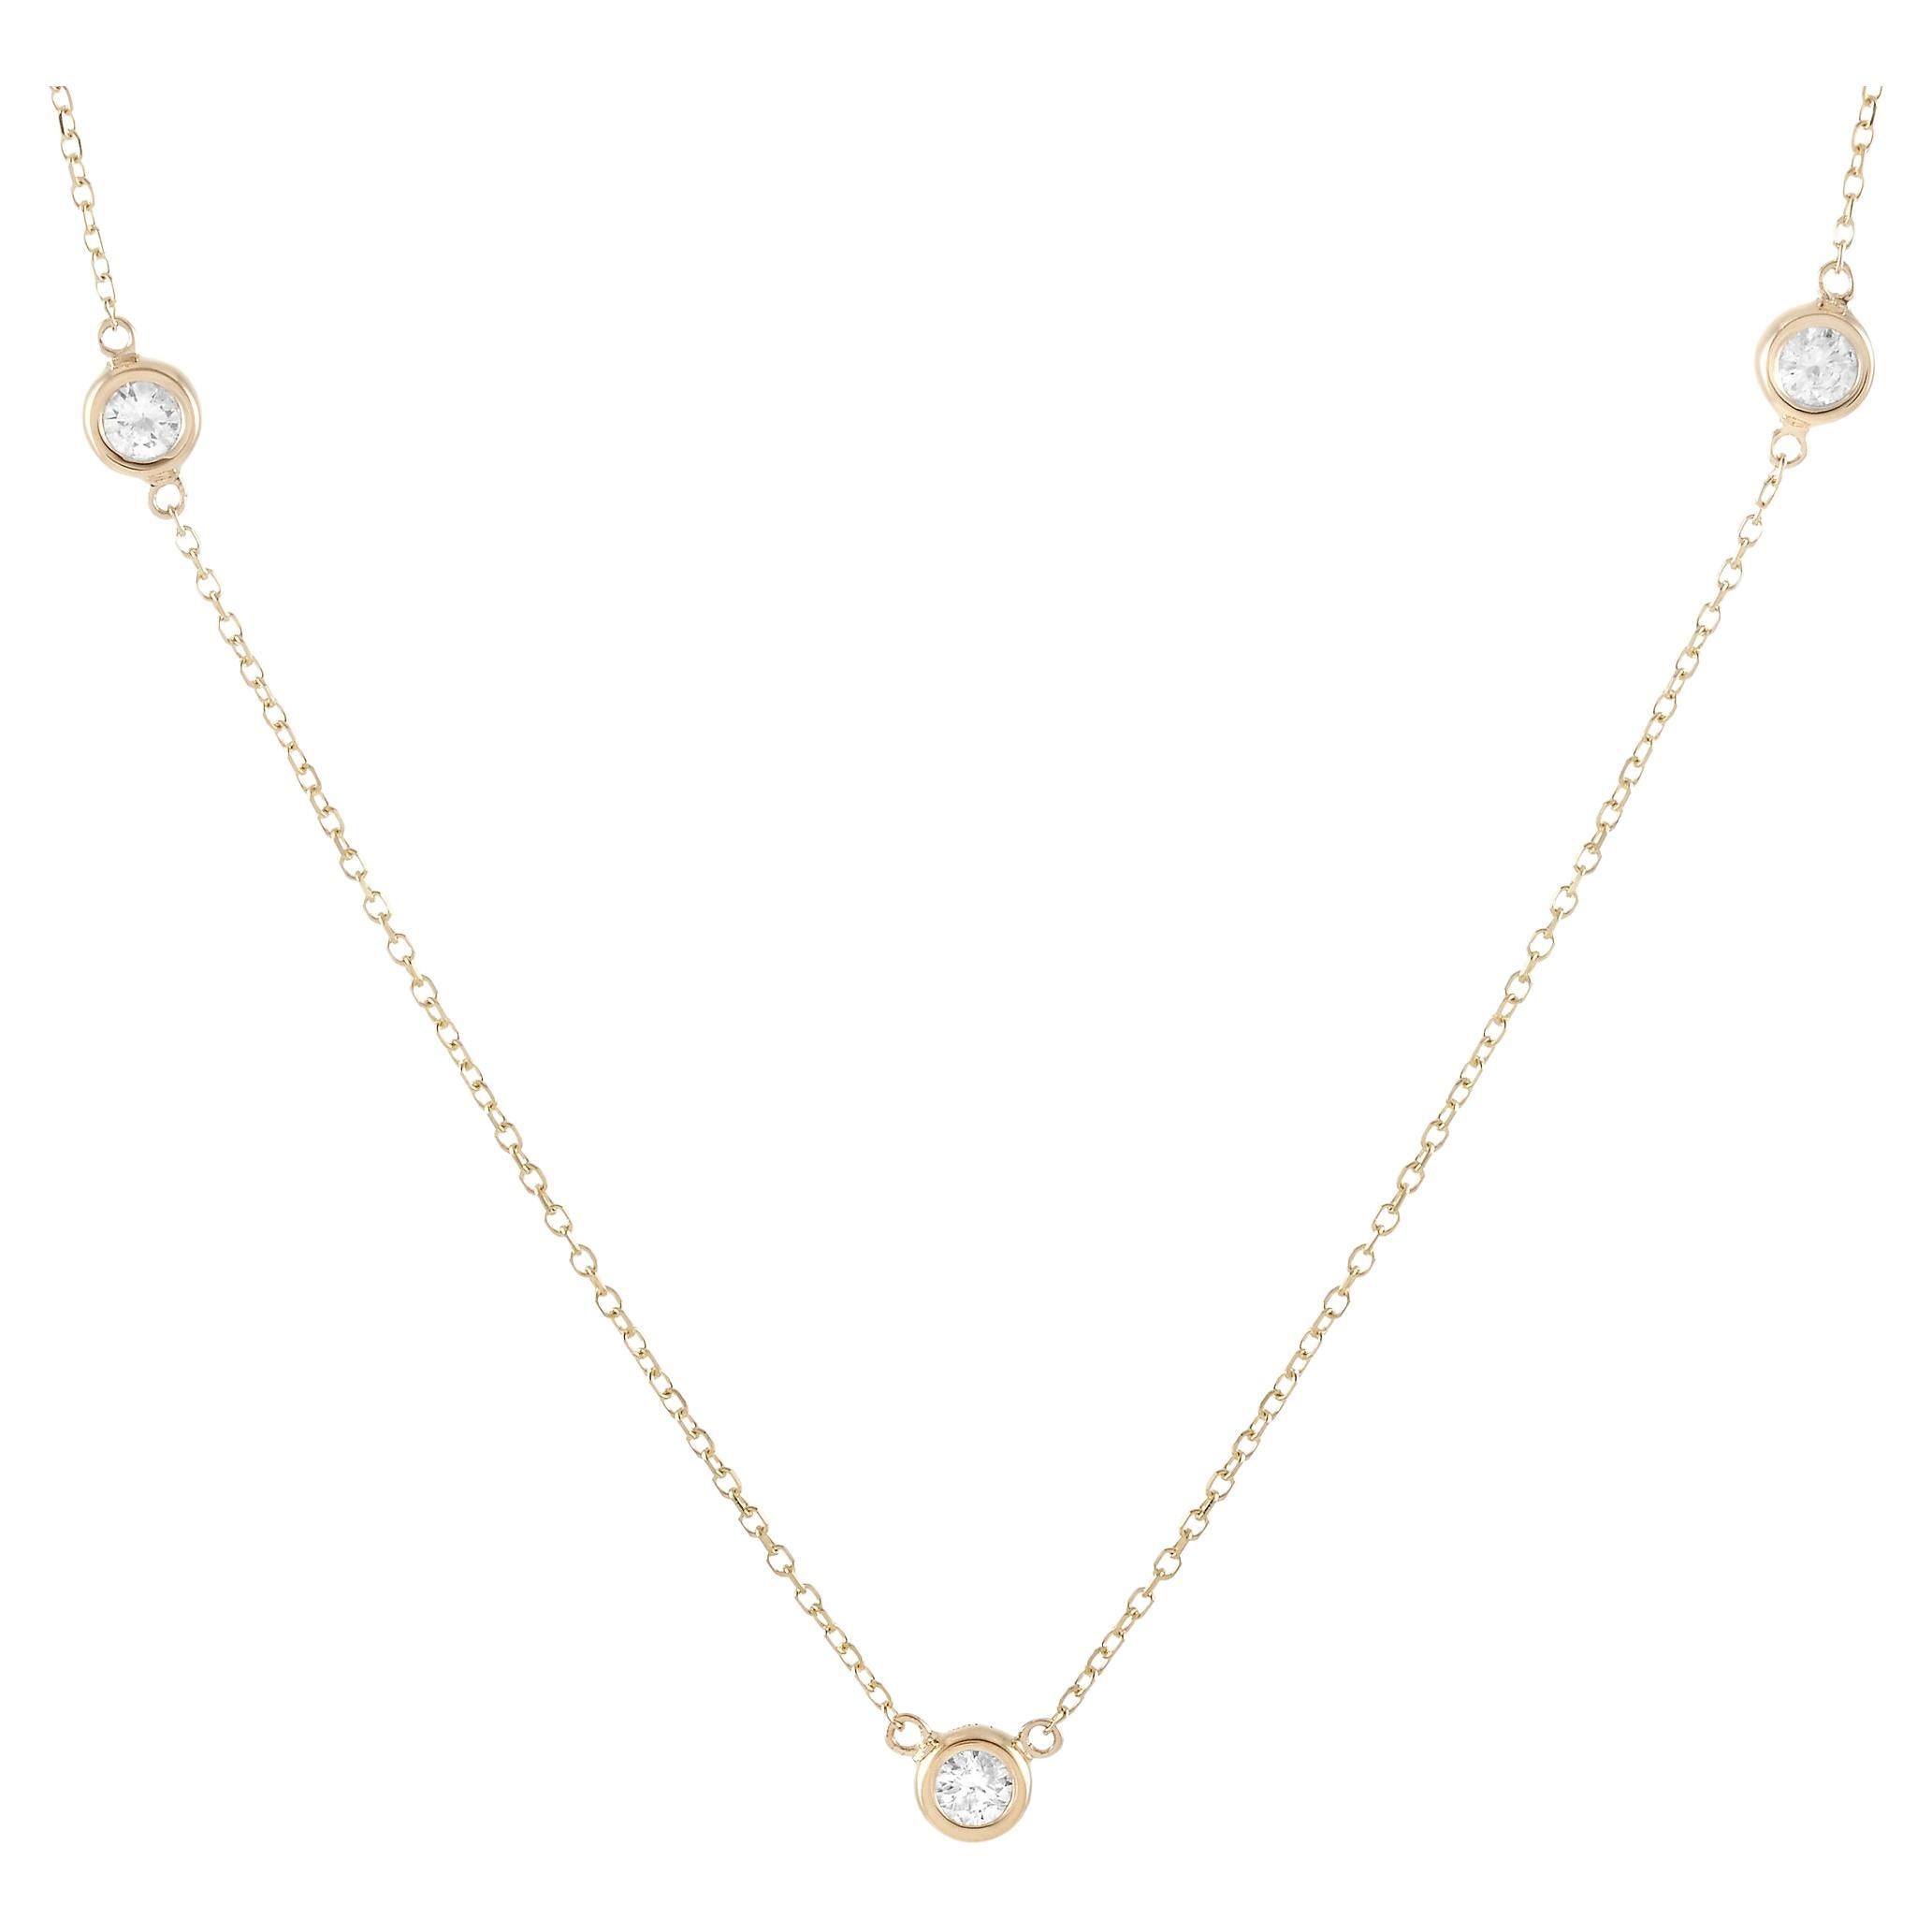 Lb Exclusive 14k Yellow Gold 0.25 Carat Diamond Necklace For Sale